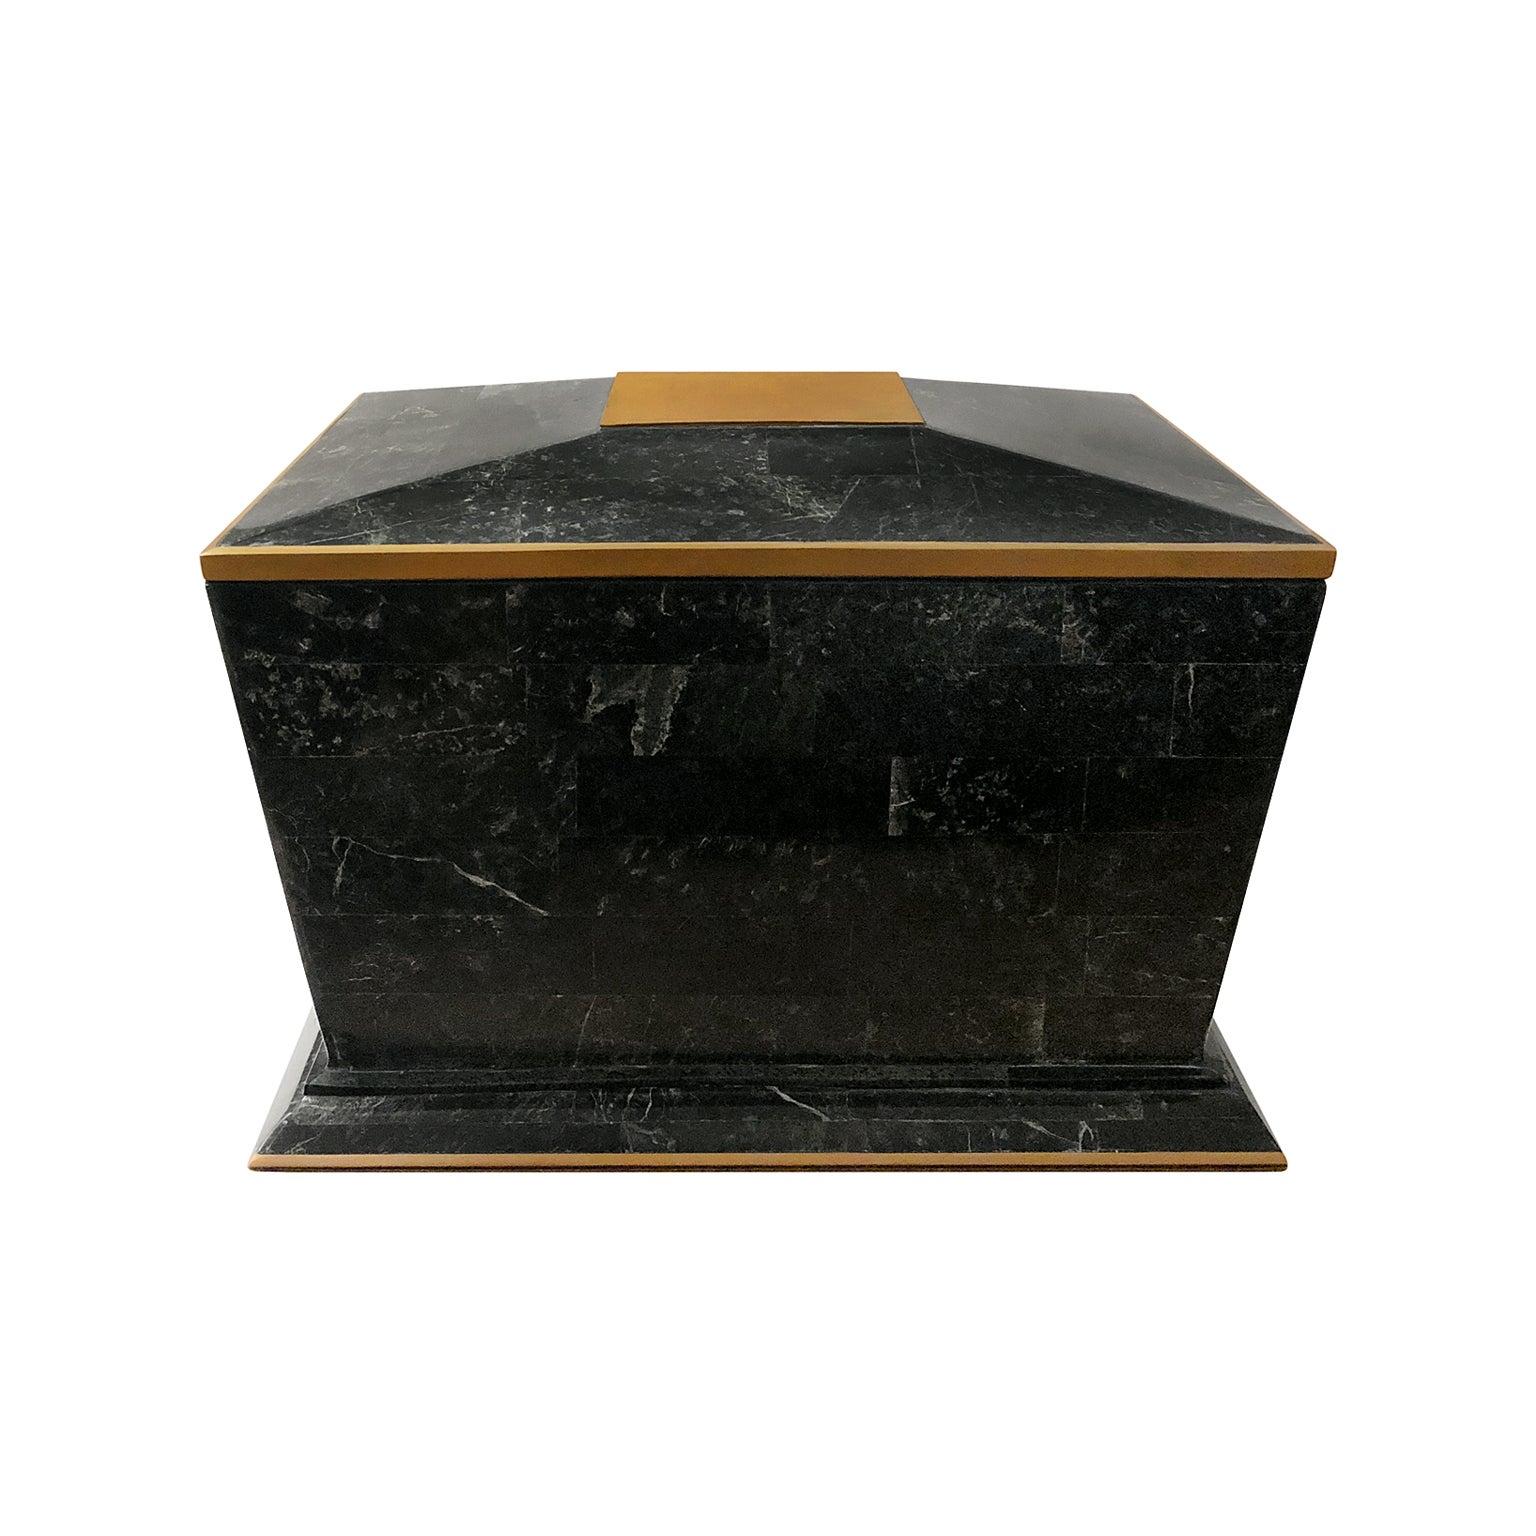 Maitland Smith black tessellated stone box with flares base and brass trim, USA, 1970s.
 